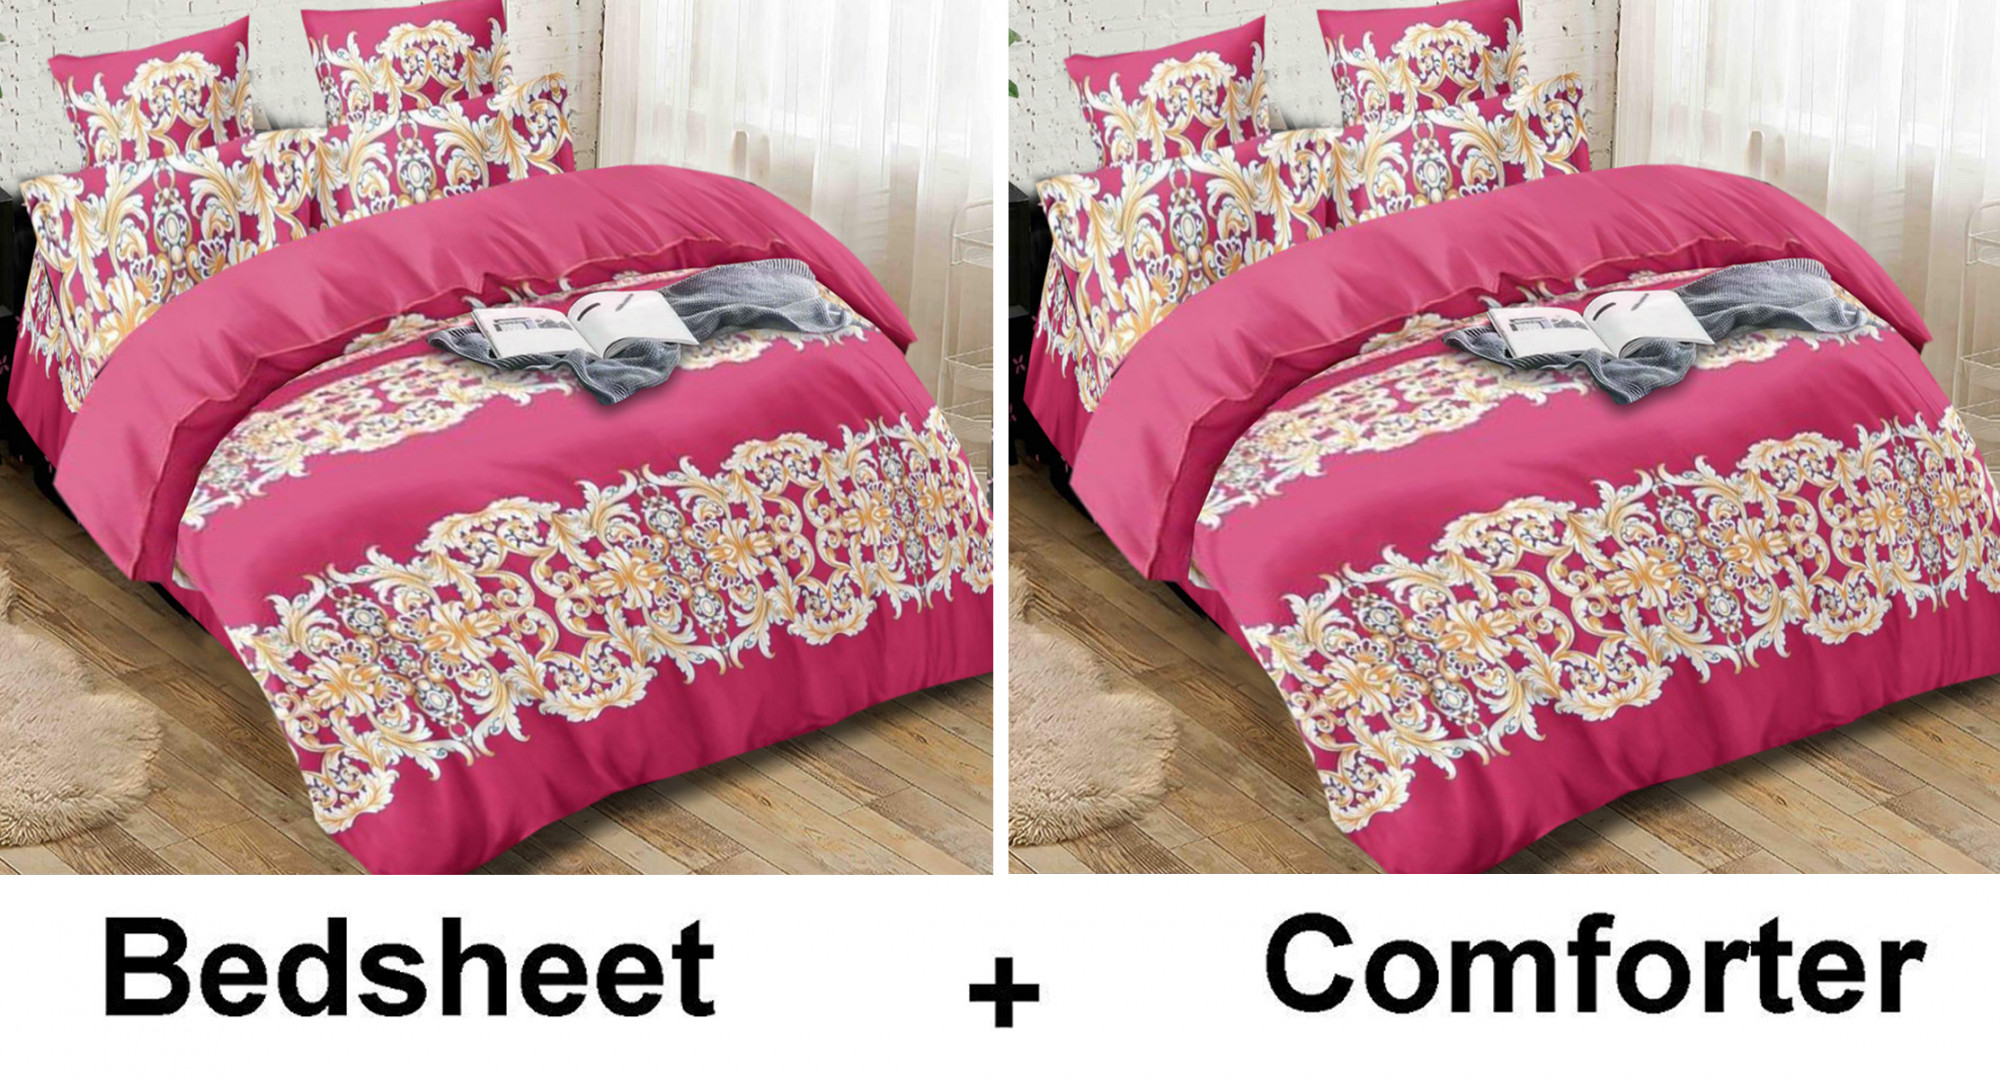 Kuber Industries Damask Print Glace Cotton AC Comforter King Size Bed Comforter, Double Bed Sheet, 2 Pillow Cover (Pink, 90x100 Inches)-Set of 4 Pieces